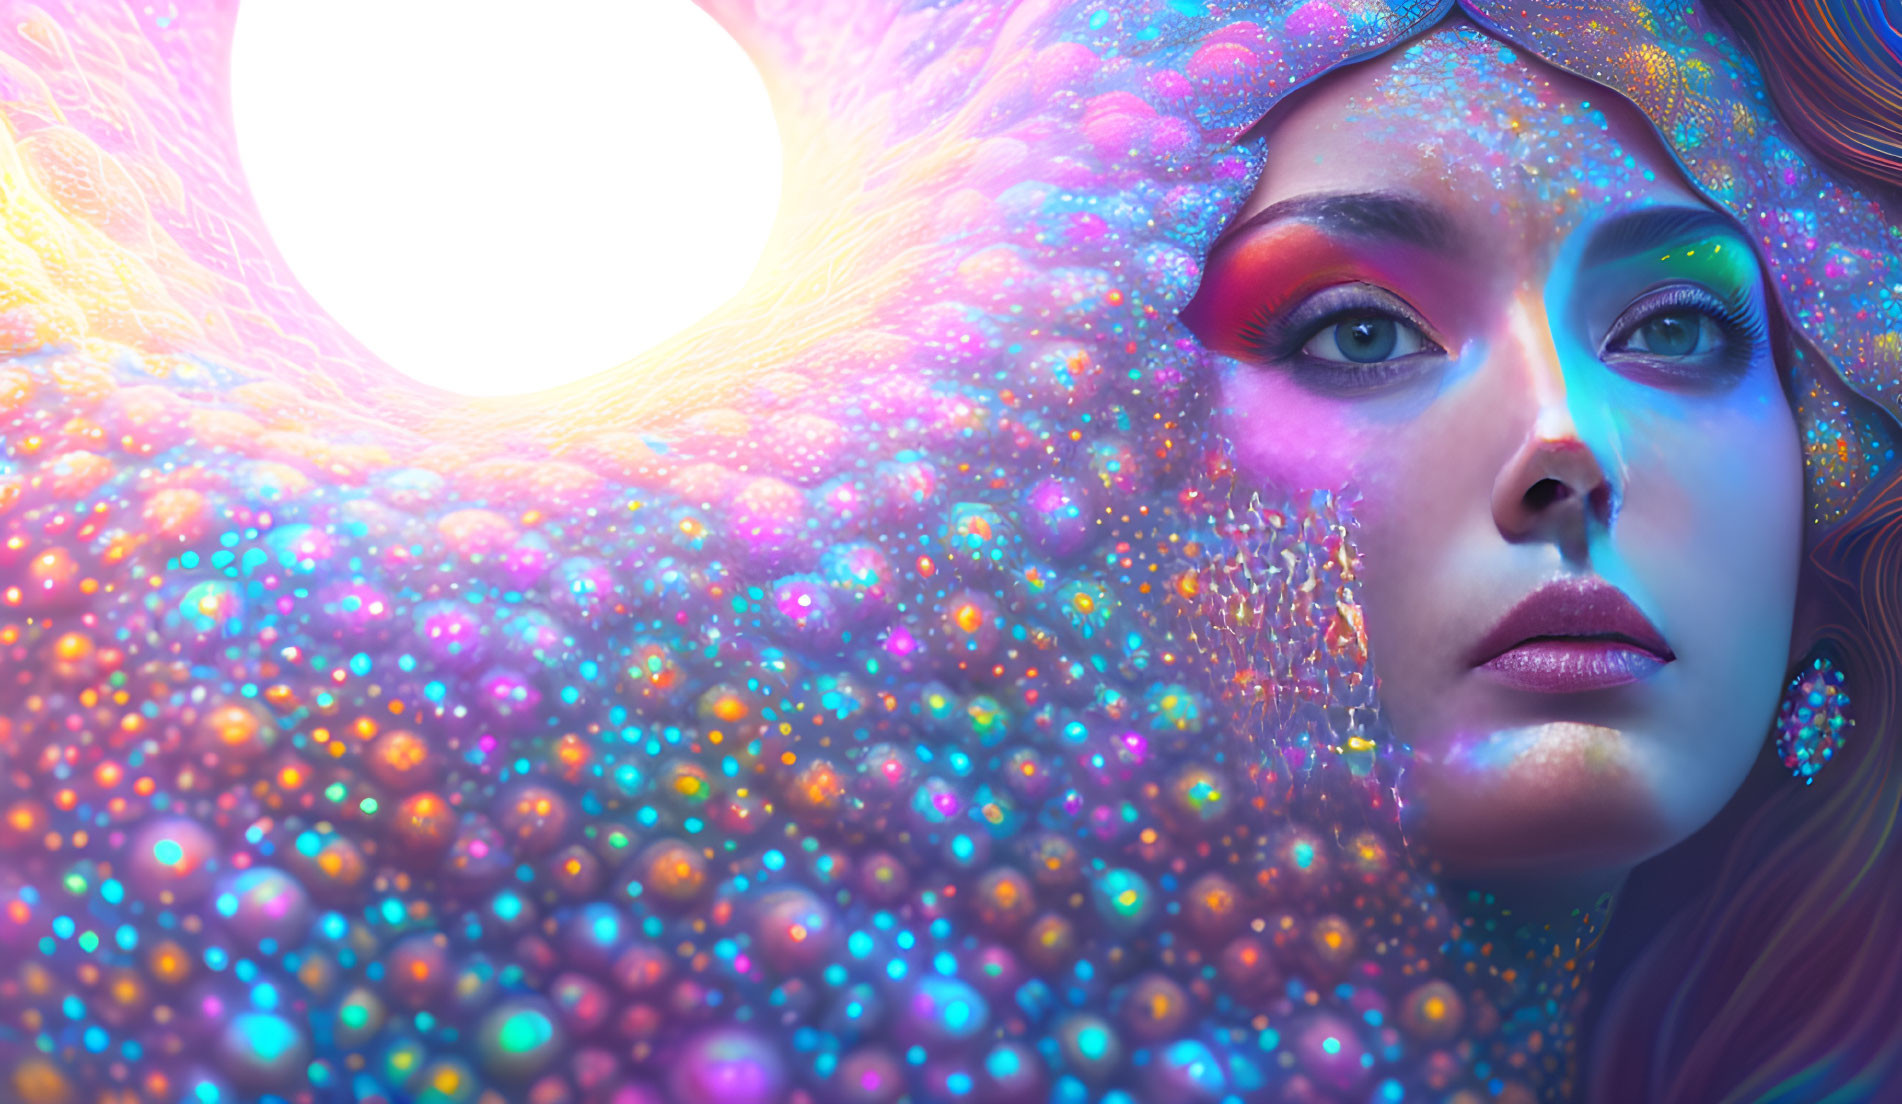 Vibrant cosmic background merges with woman's face in celestial scene